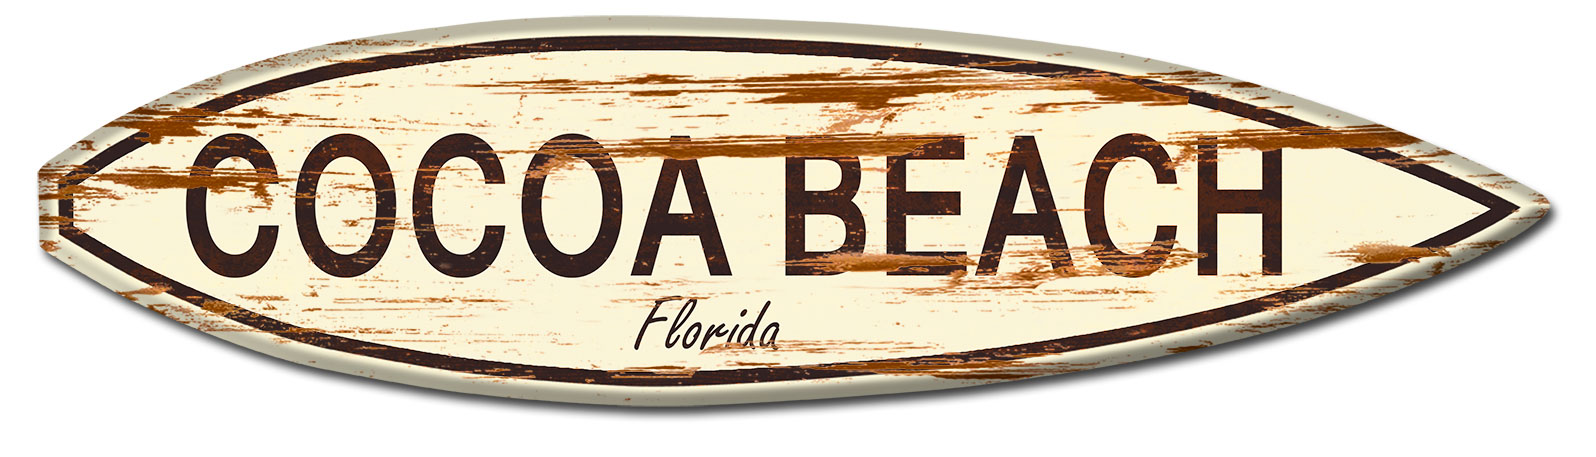 Cocoa Beach Surf Board Wood Print Vintage Sign